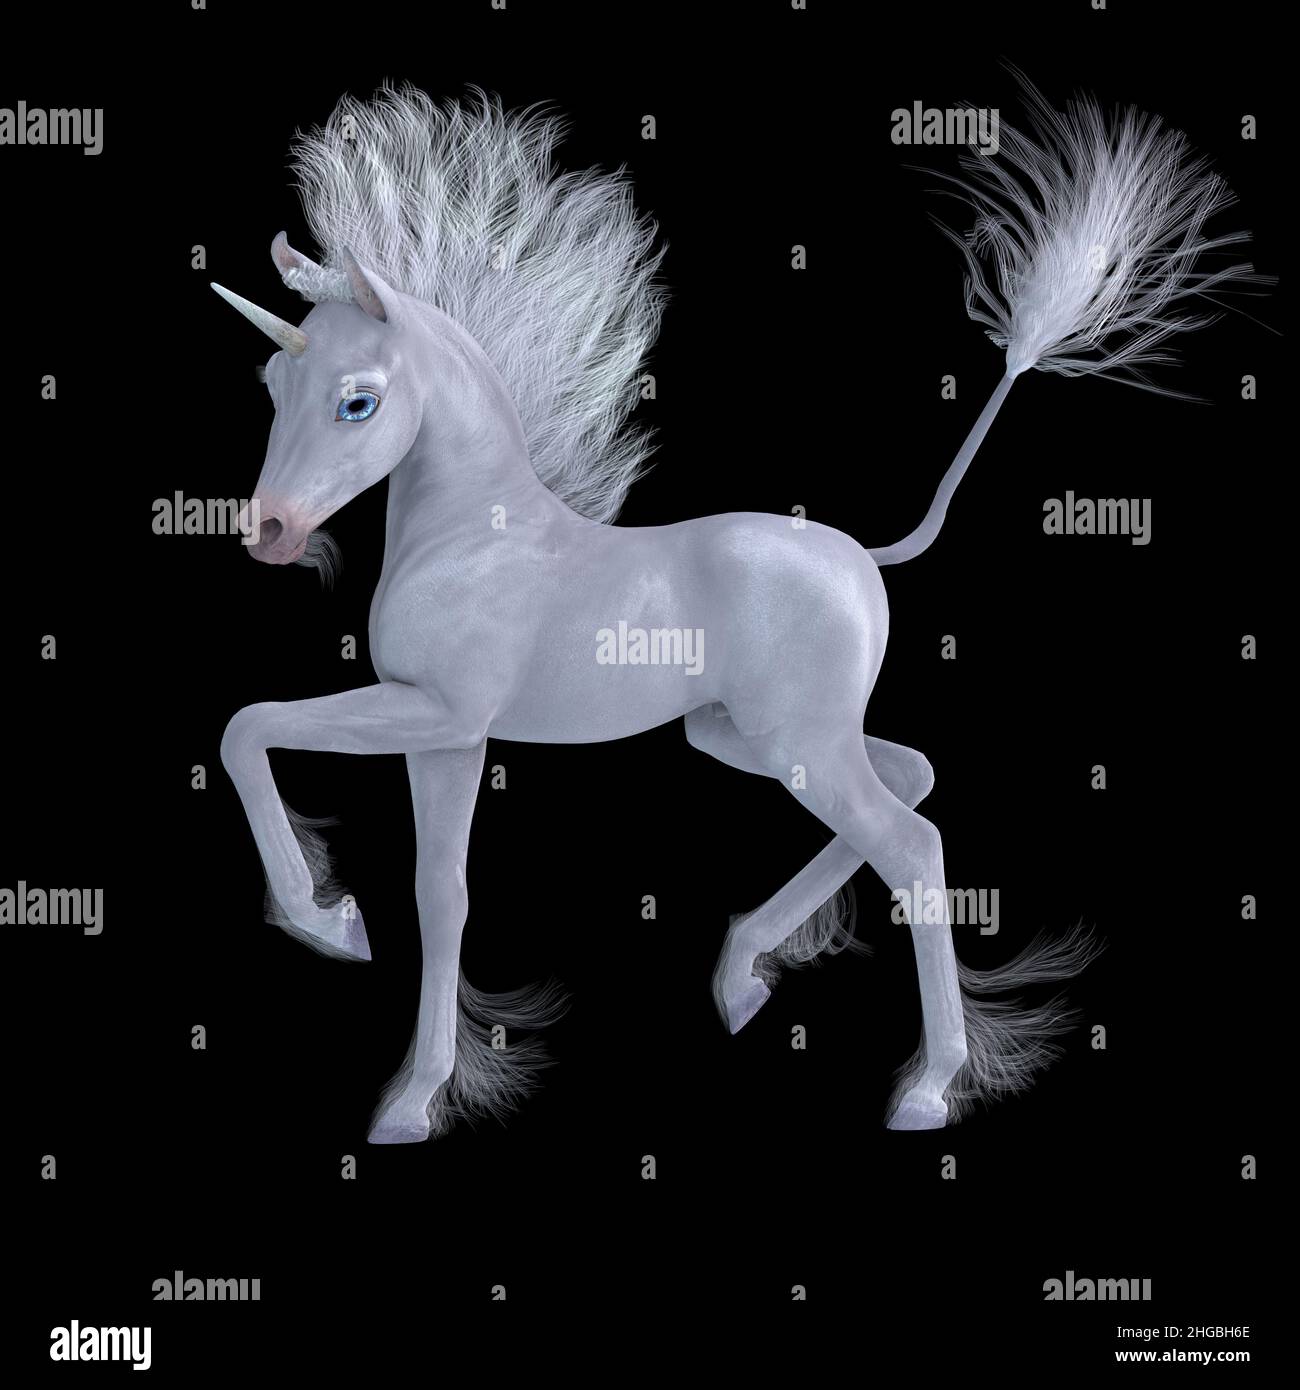 A little white colt unicorn famous as a legendary creature with magical abilities. Stock Photo